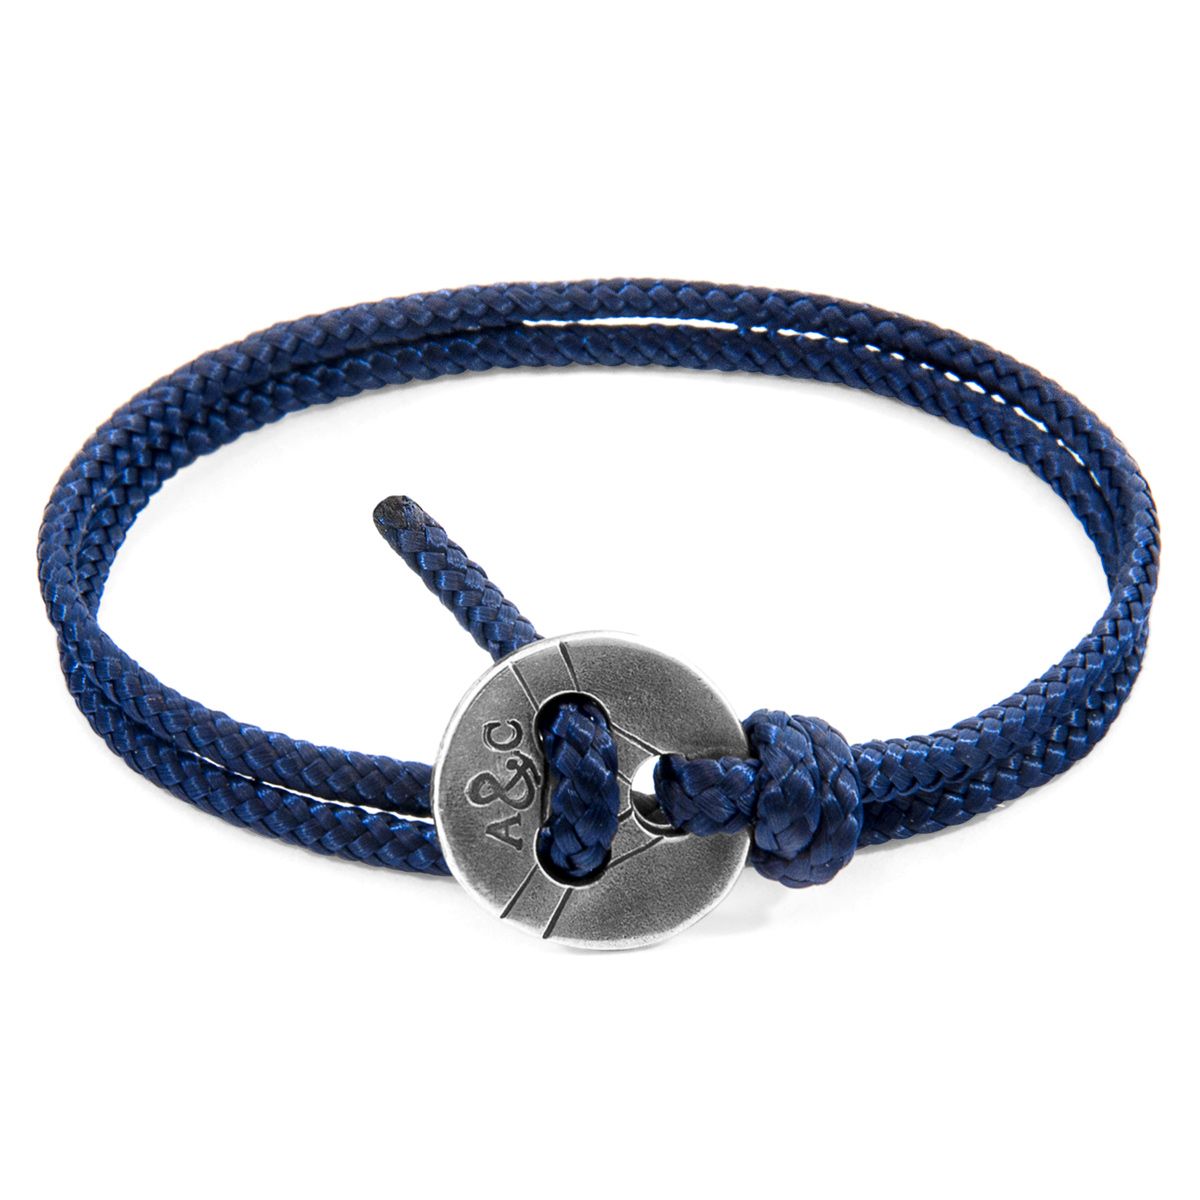 The Navy Blue Lerwick Silver and Rope Bracelet was both designed and skilfully handcrafted completely in Great Britain, In Quality We Trust. For the Modern Journeyman (and woman), ANCHOR & CREW takes ownership of an exploratory lifestyle and enjoys the Happy-Good Life. Combining British craft manufacturing with a discerning modern-minimalist style, this ANCHOR & CREW bracelet features:

3mm diameter performance Marine Grade polyester and nylon rope (GB) 
Solid .925 sterling silver decorated tri-hole button (GB) 

SIZING
This bracelet is one size fits all, with the rope able to suit your wrist size. To take the bracelet on or off your wrist, simply double wrap the bracelet, then feed the rope within one hole of the button and feed back through the other hole. Tighten as necessary.